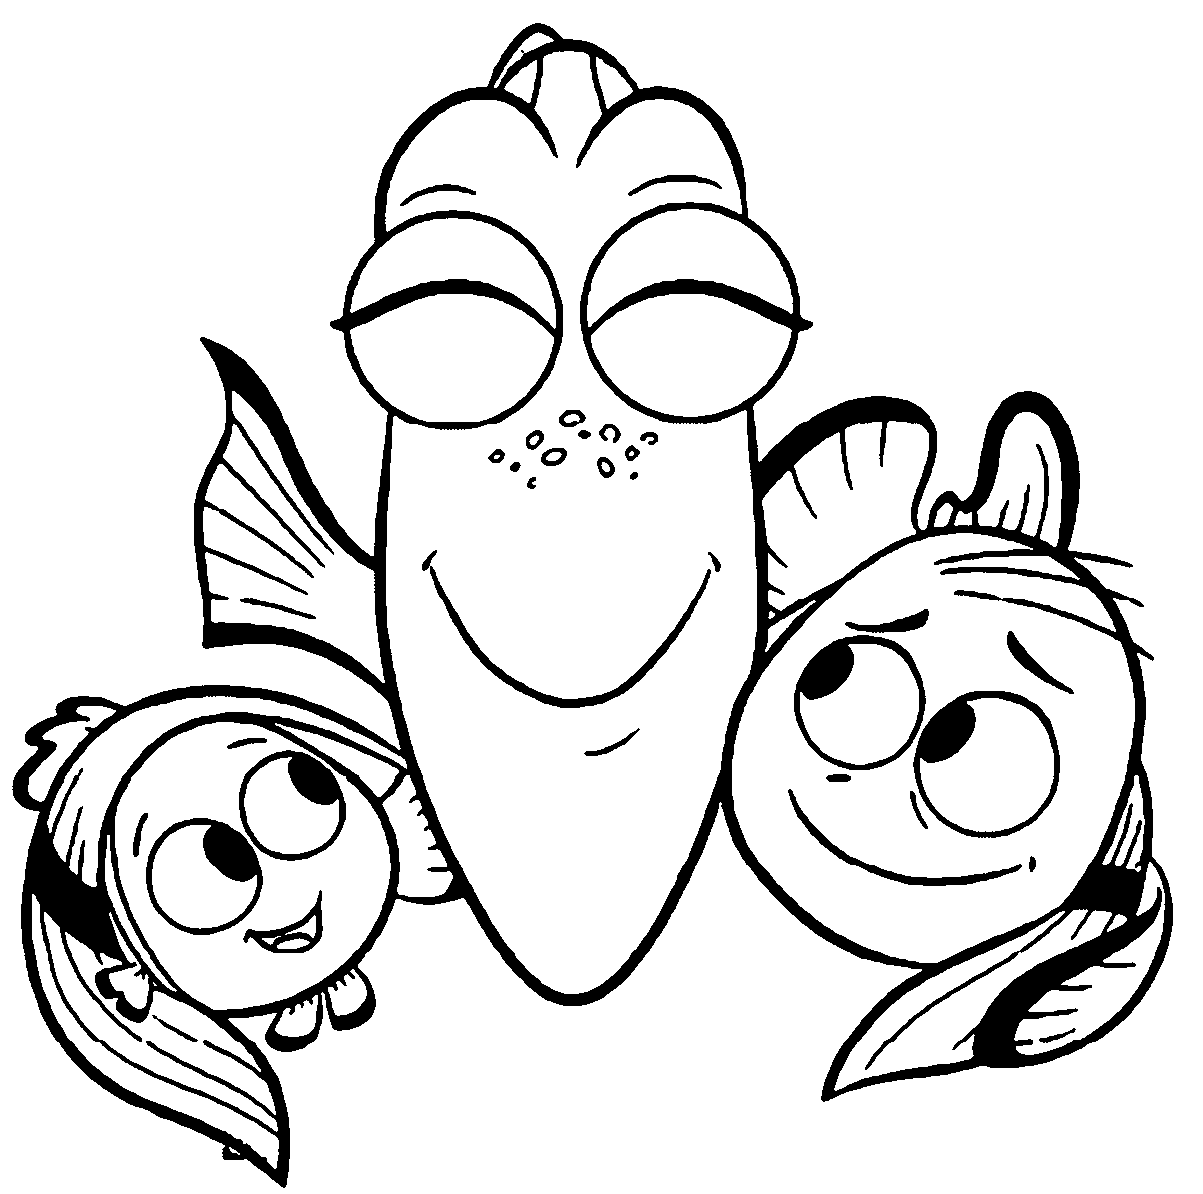 Finding Dory Coloring Pages TV Film Dory Printable 2020 02770 Coloring4free